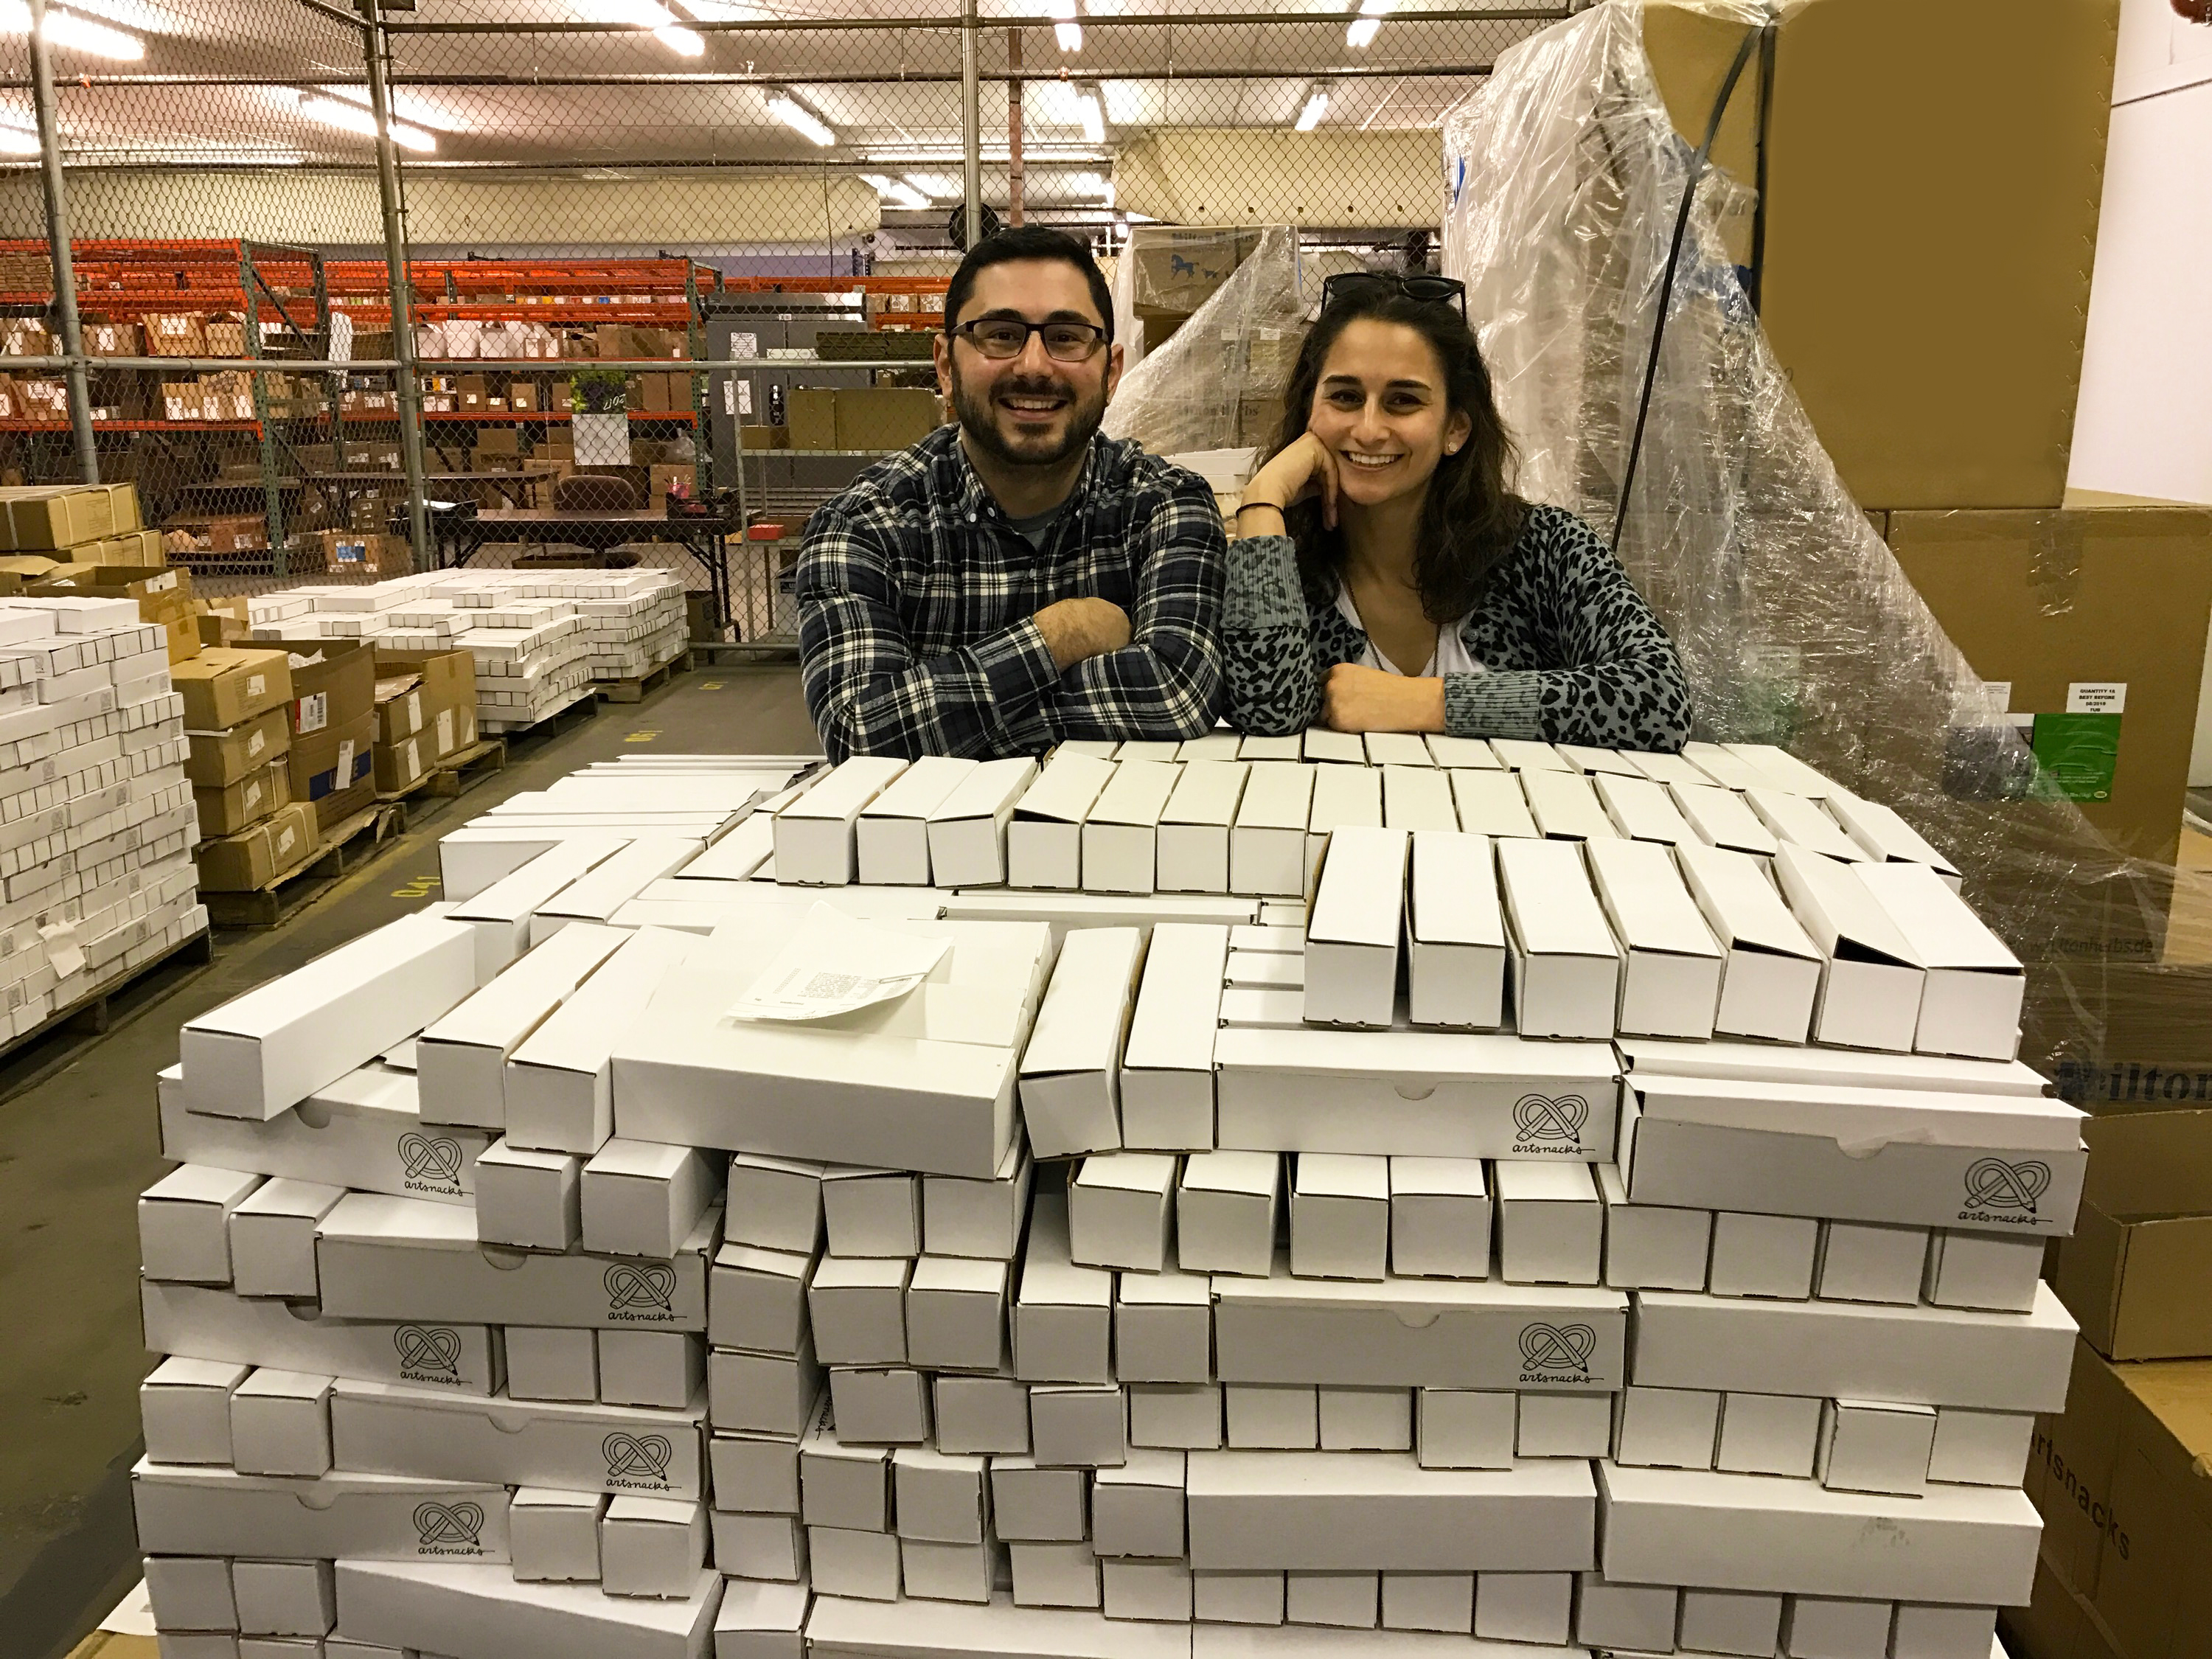 Sarah and Lee pose next to a large shipping pallet of ArtSnacks boxes. 